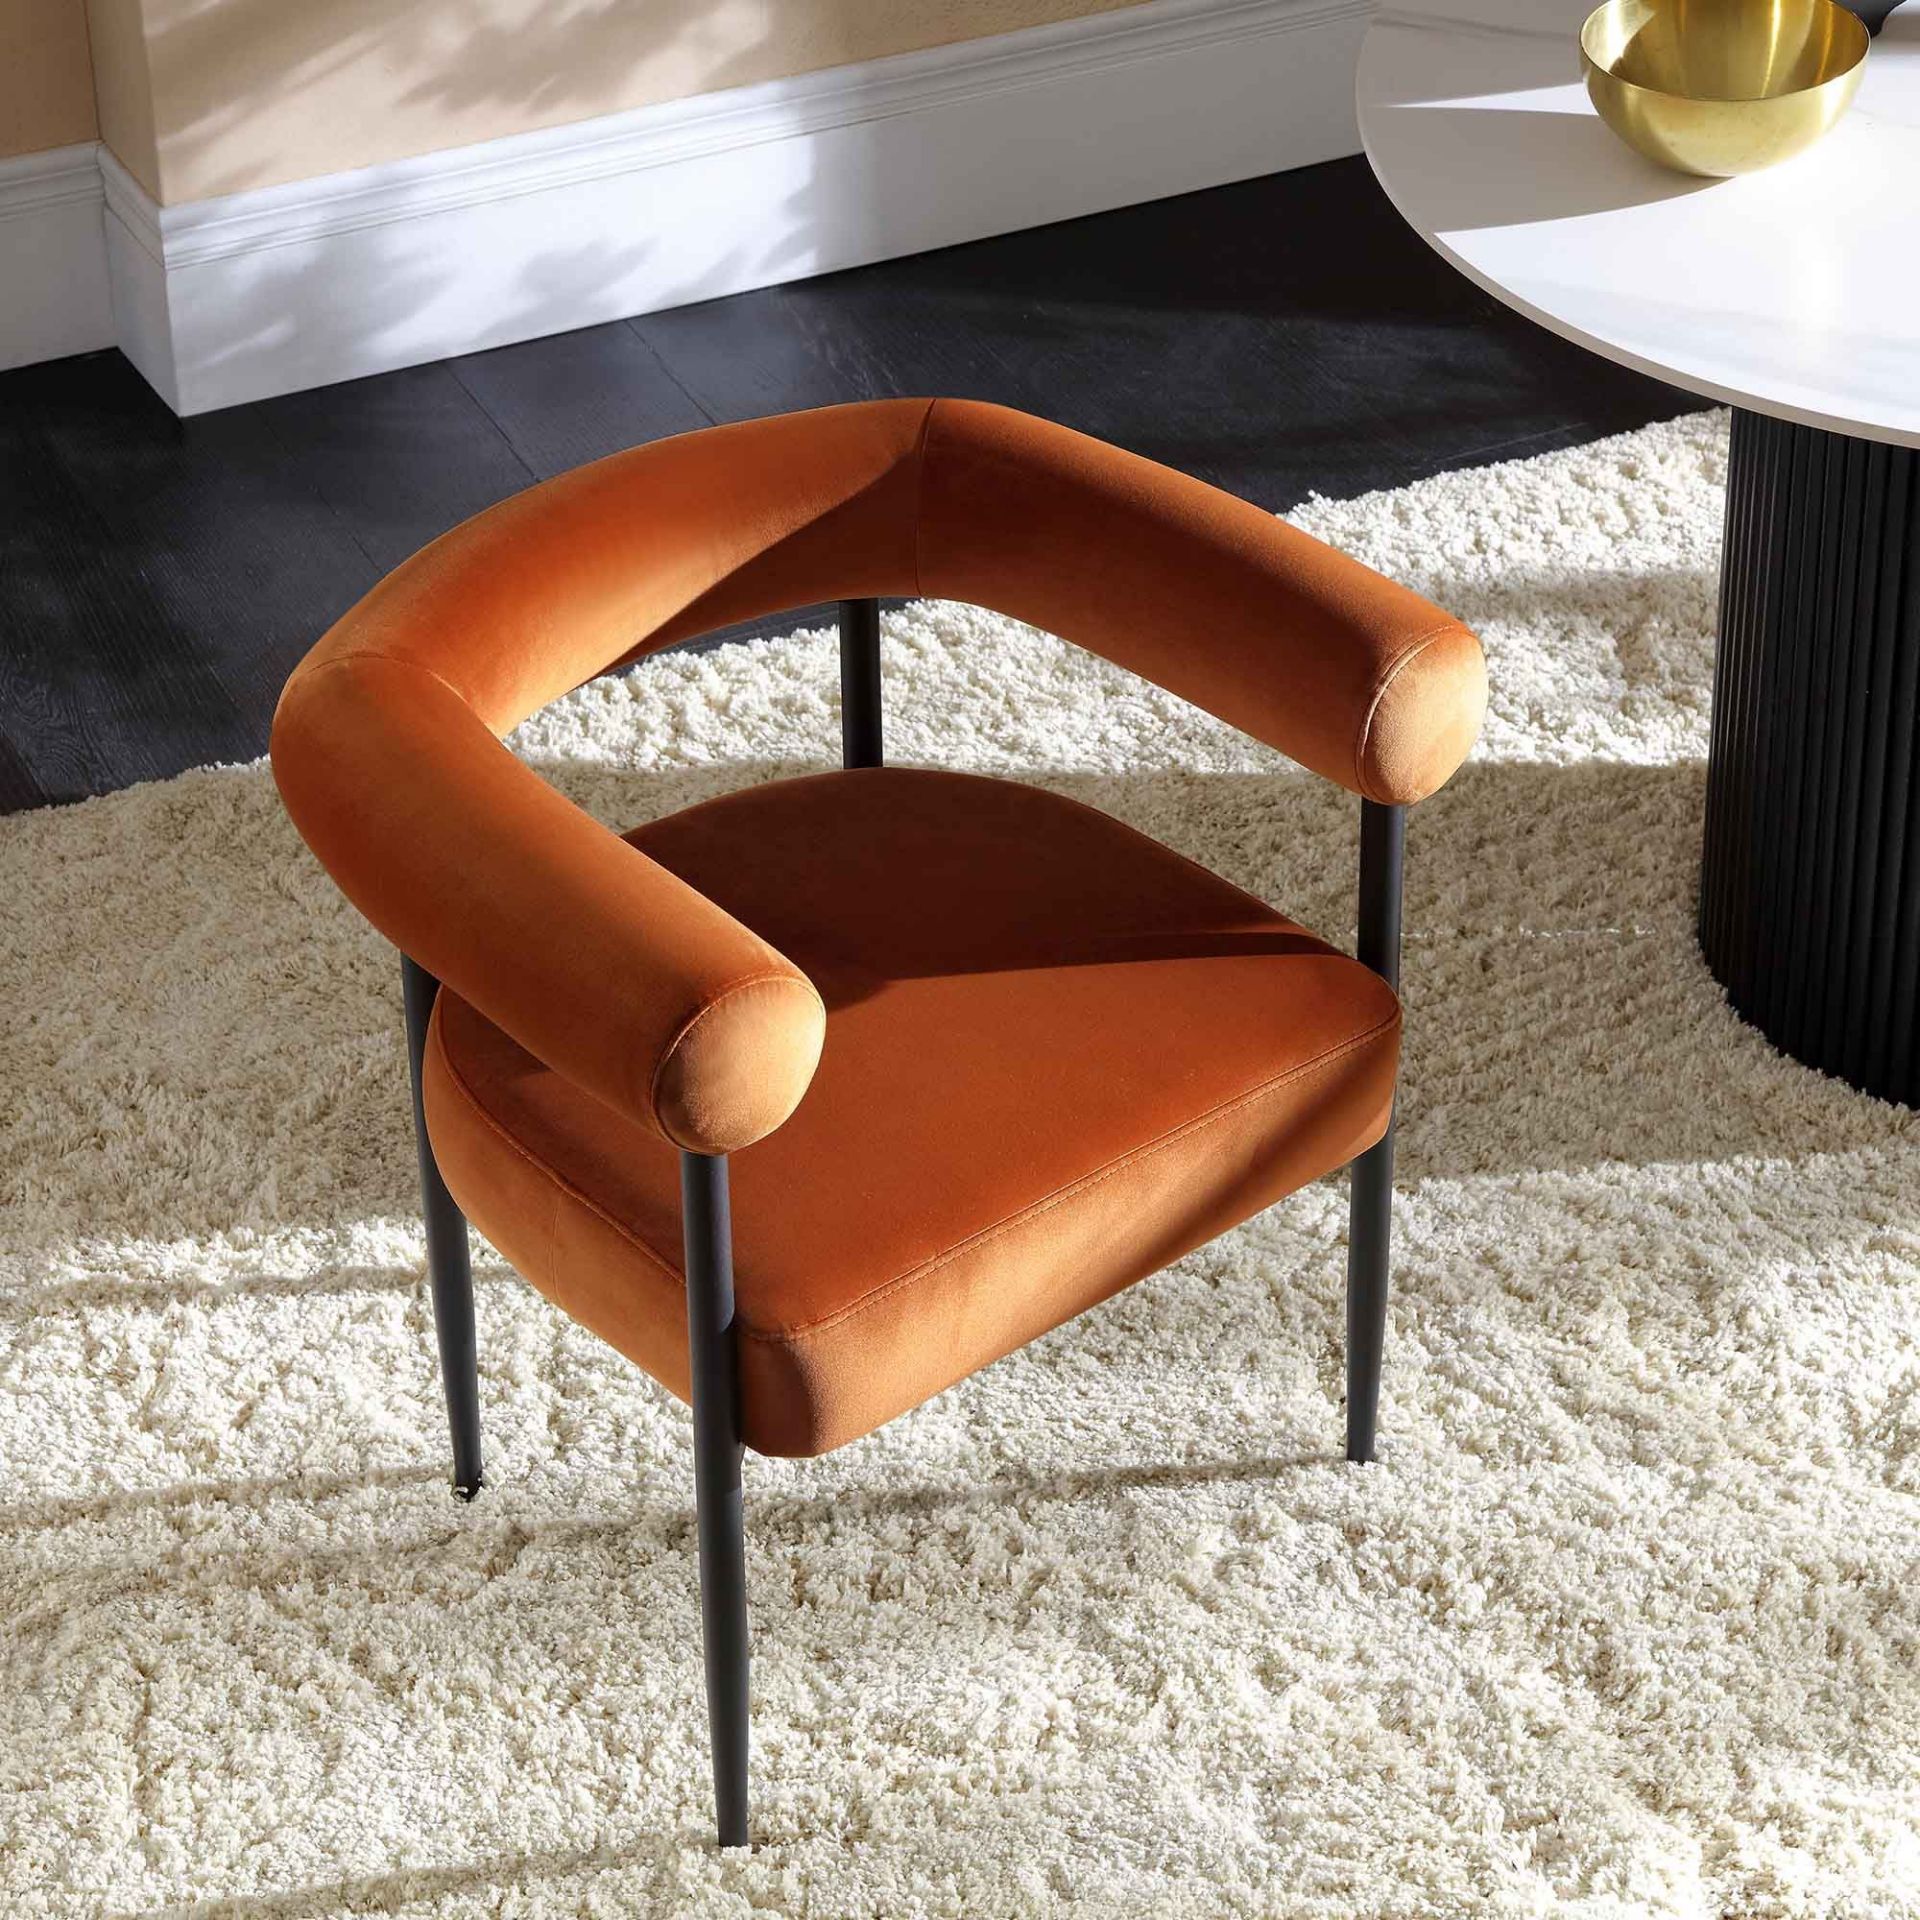 Fulbourn Rust Velvet Dining Chair with Black Legs. - R19.6. RRP £199.99. Well-cushioned seat and - Image 2 of 2